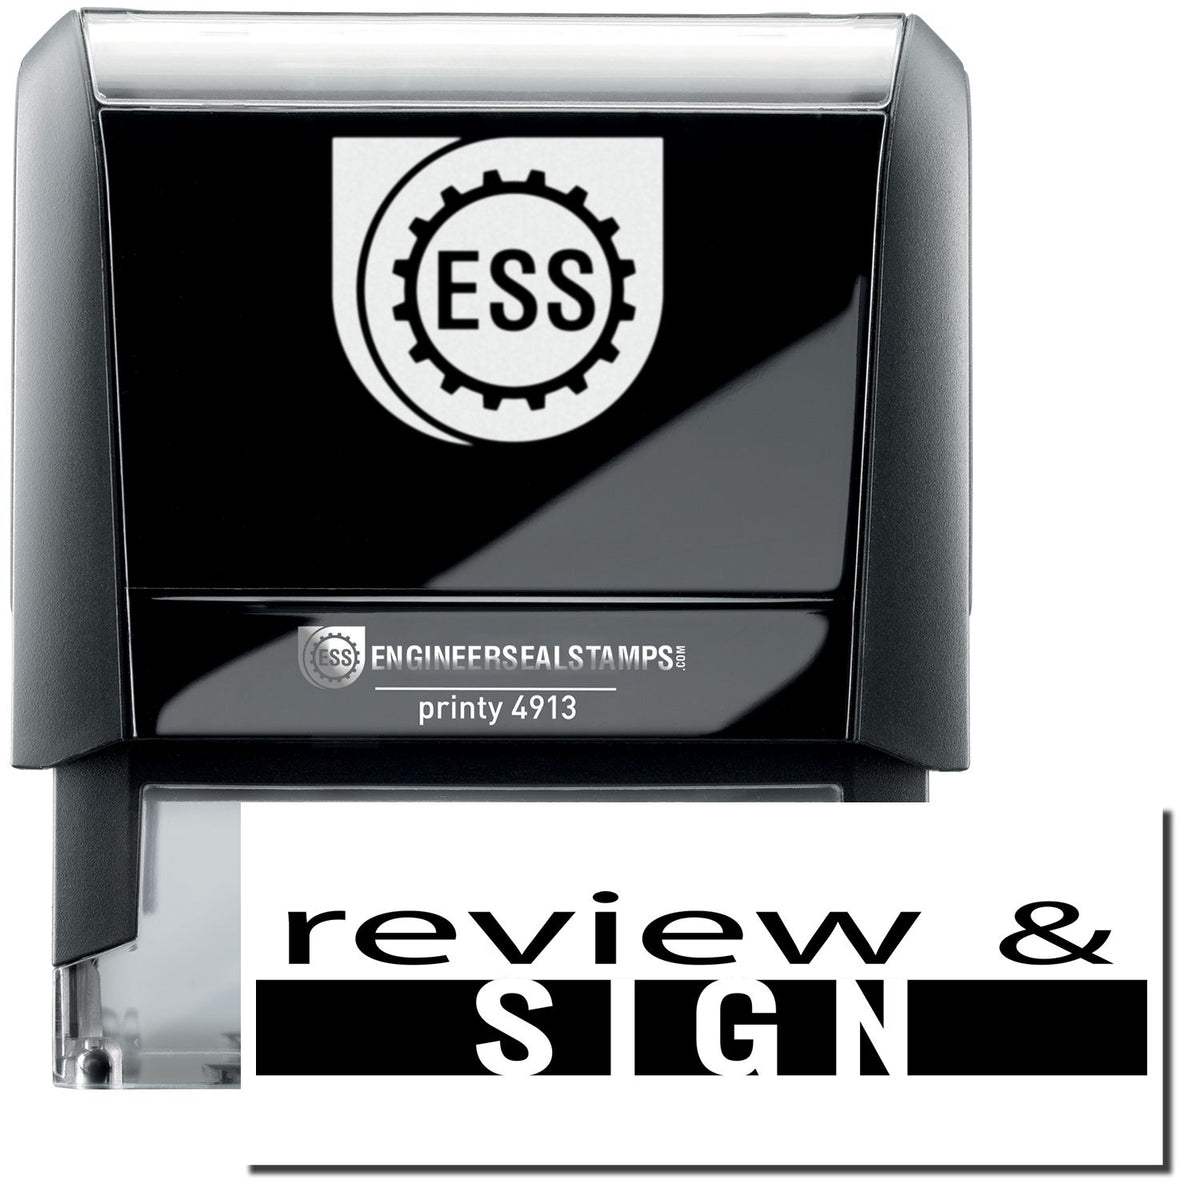 A self-inking stamp with a stamped image showing how the text &quot;review &amp; SIGN&quot; (The word &quot;SIGN&quot; written inside the black box) in a large font is displayed by it after stamping.